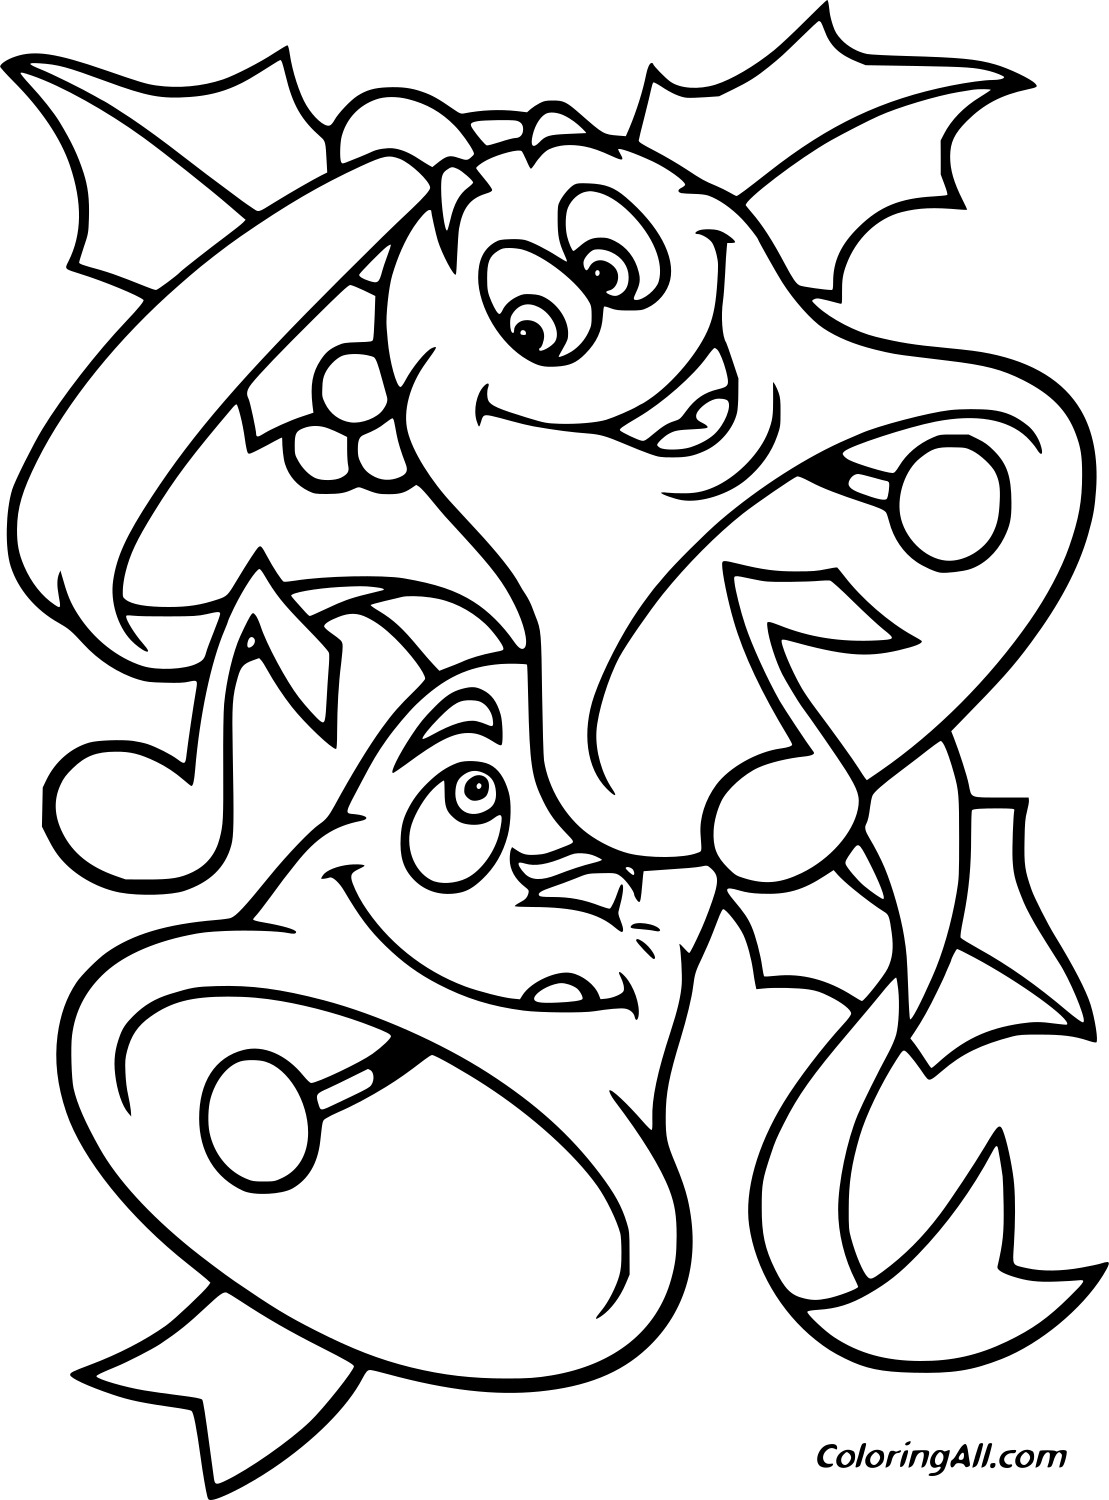 Two Jingle Bells With Funny Faces For Kids Coloring Page